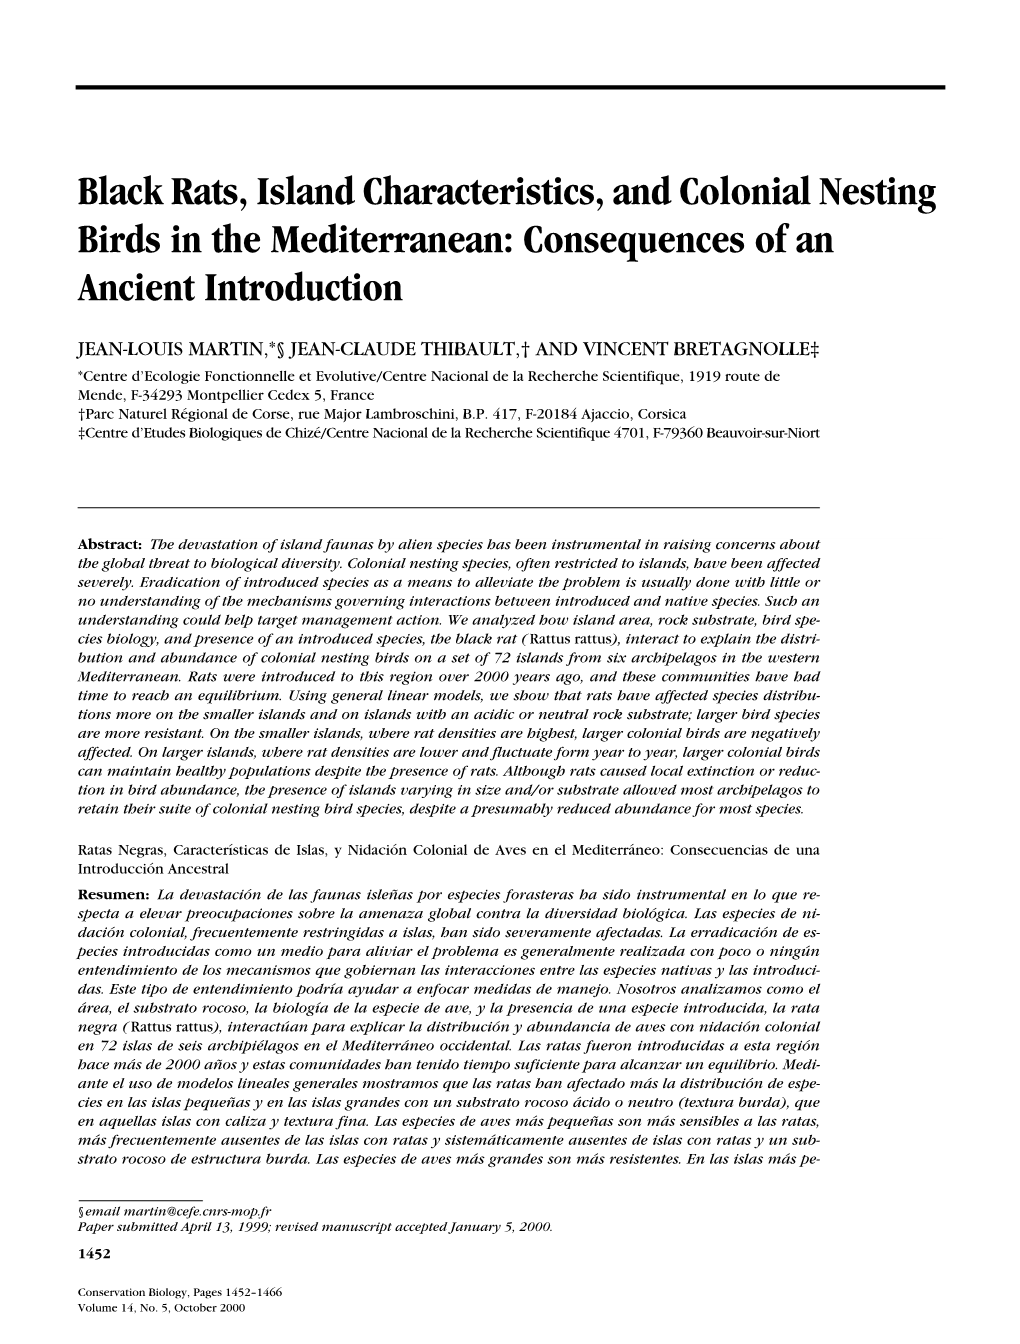 Black Rats, Island Characteristics, and Colonial Nesting Birds in the Mediterranean: Consequences of an Ancient Introduction